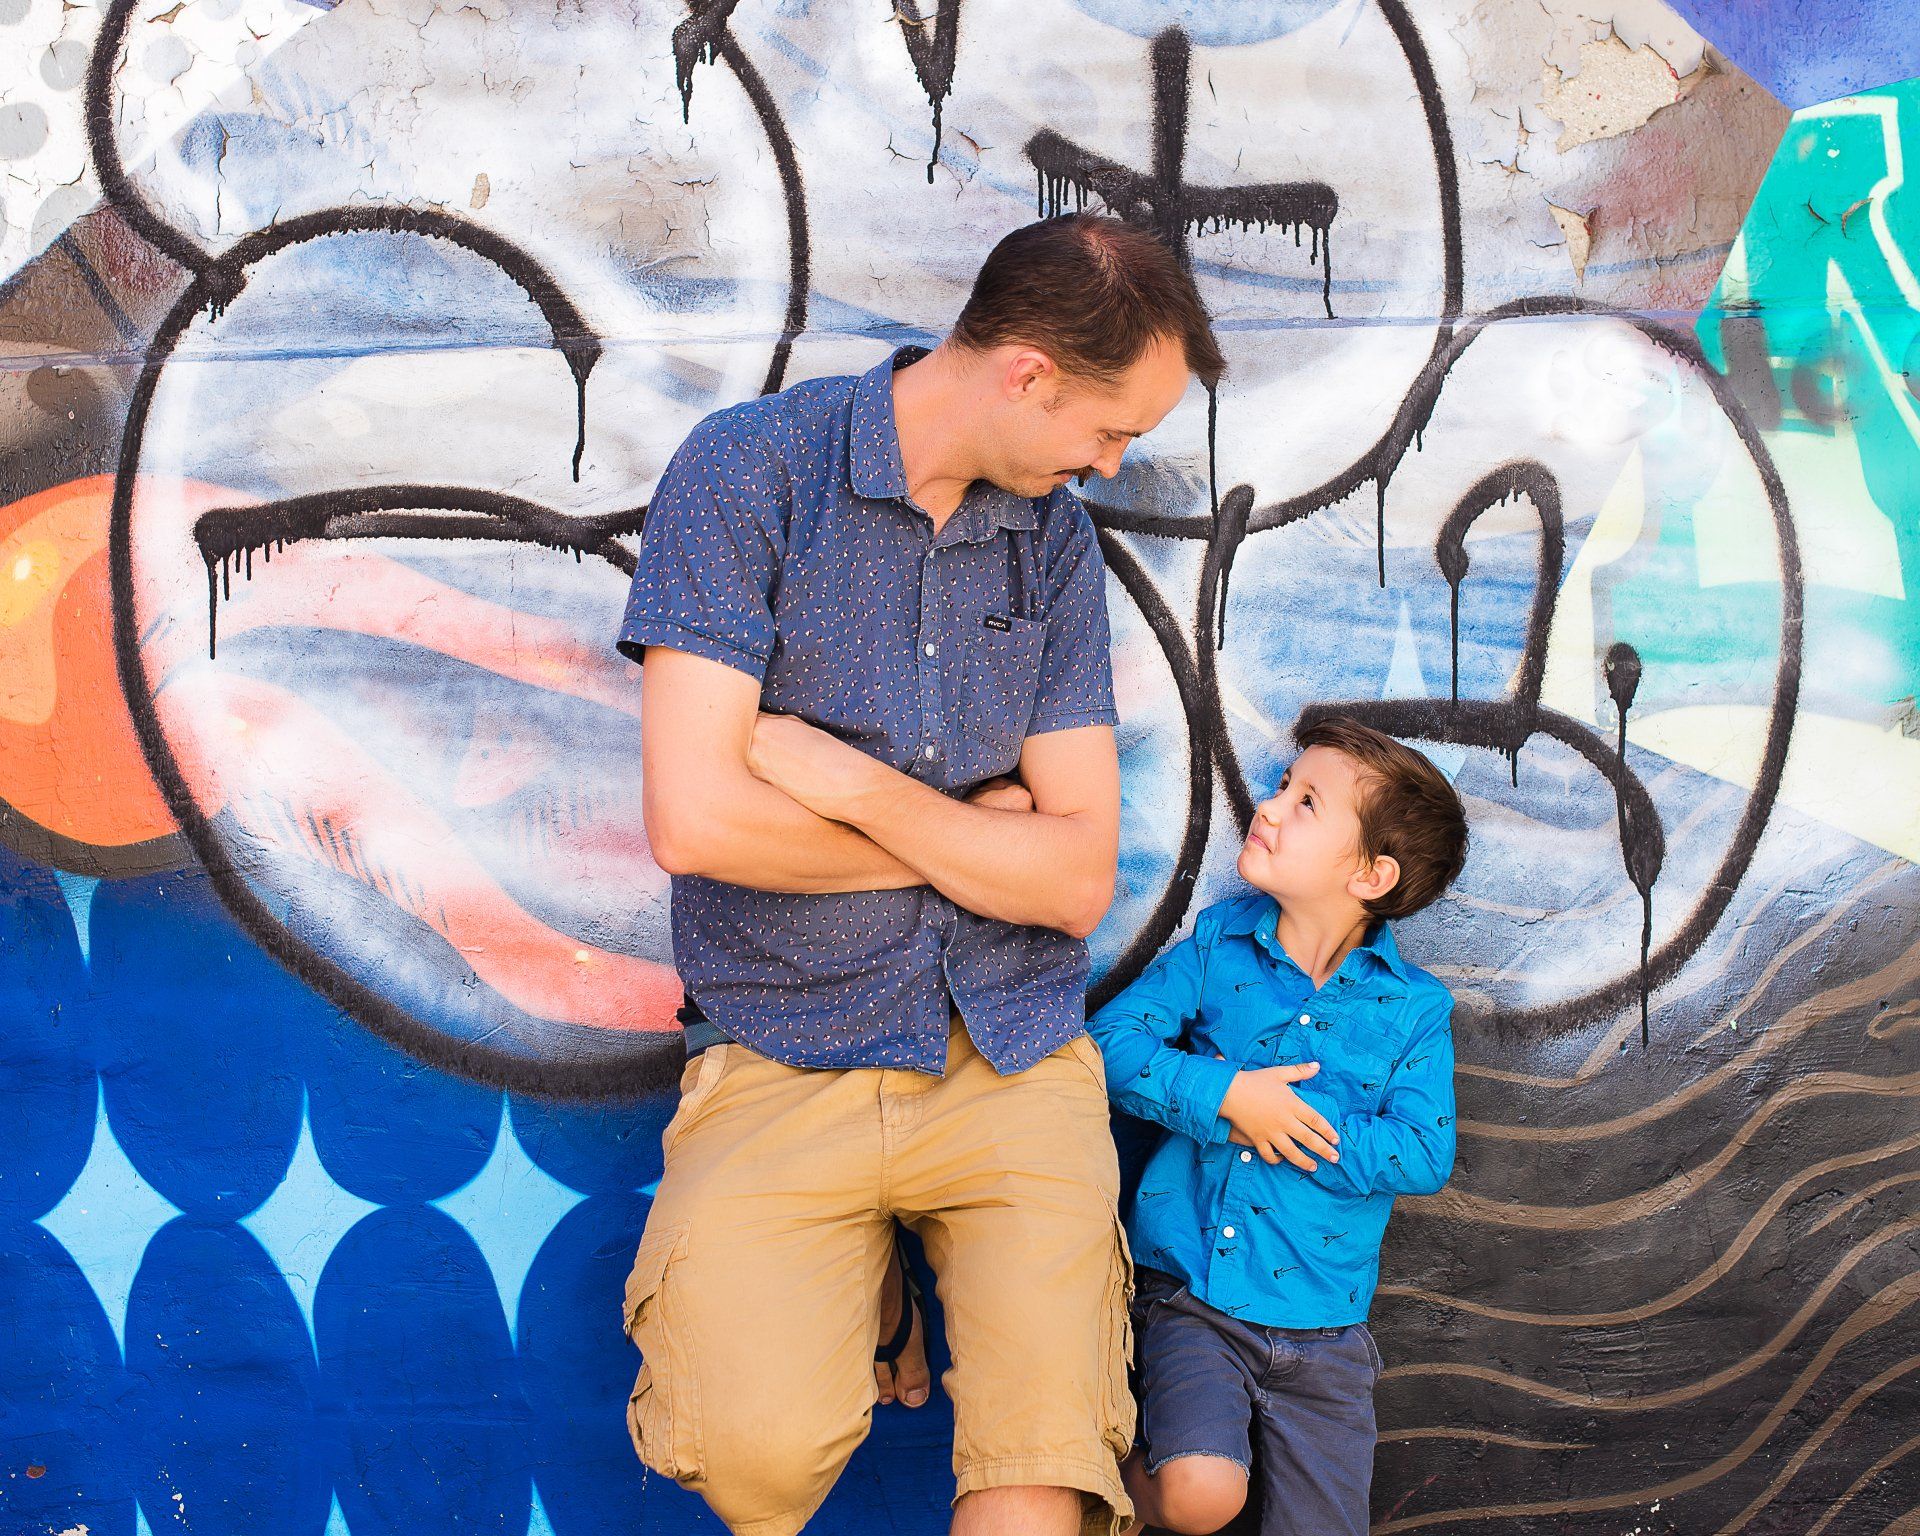 Lifestyle photography Toronto | Stacey Naglie | Man and boy standing in front of graffiti covered wall